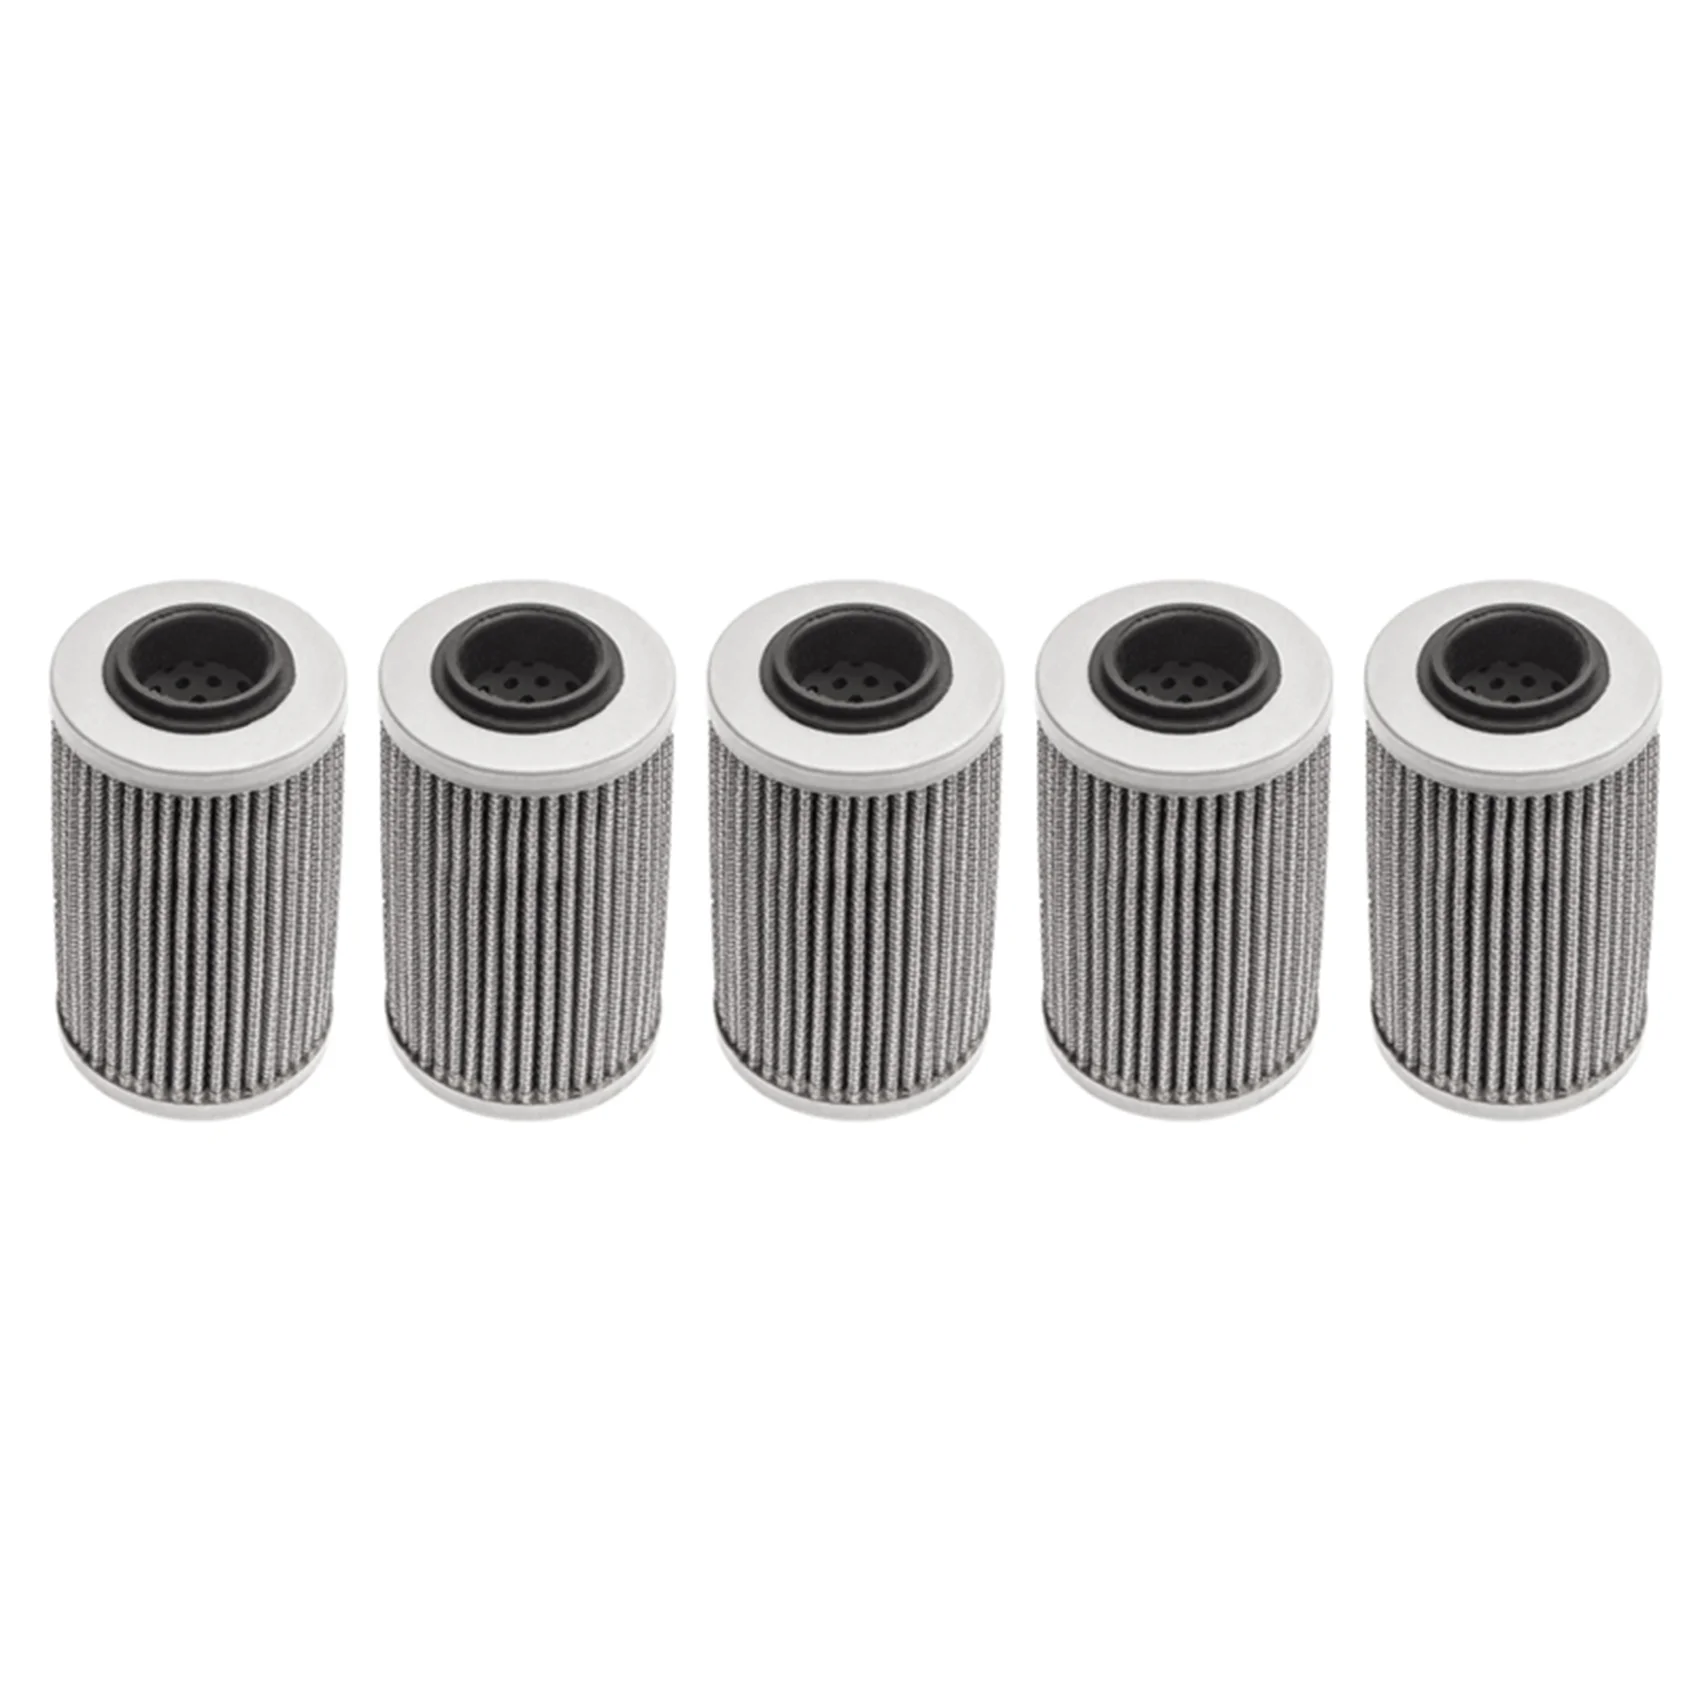 

5X Oil Filter 1503 and 1630 for Sea Doo Seadoo Rotax 420956744